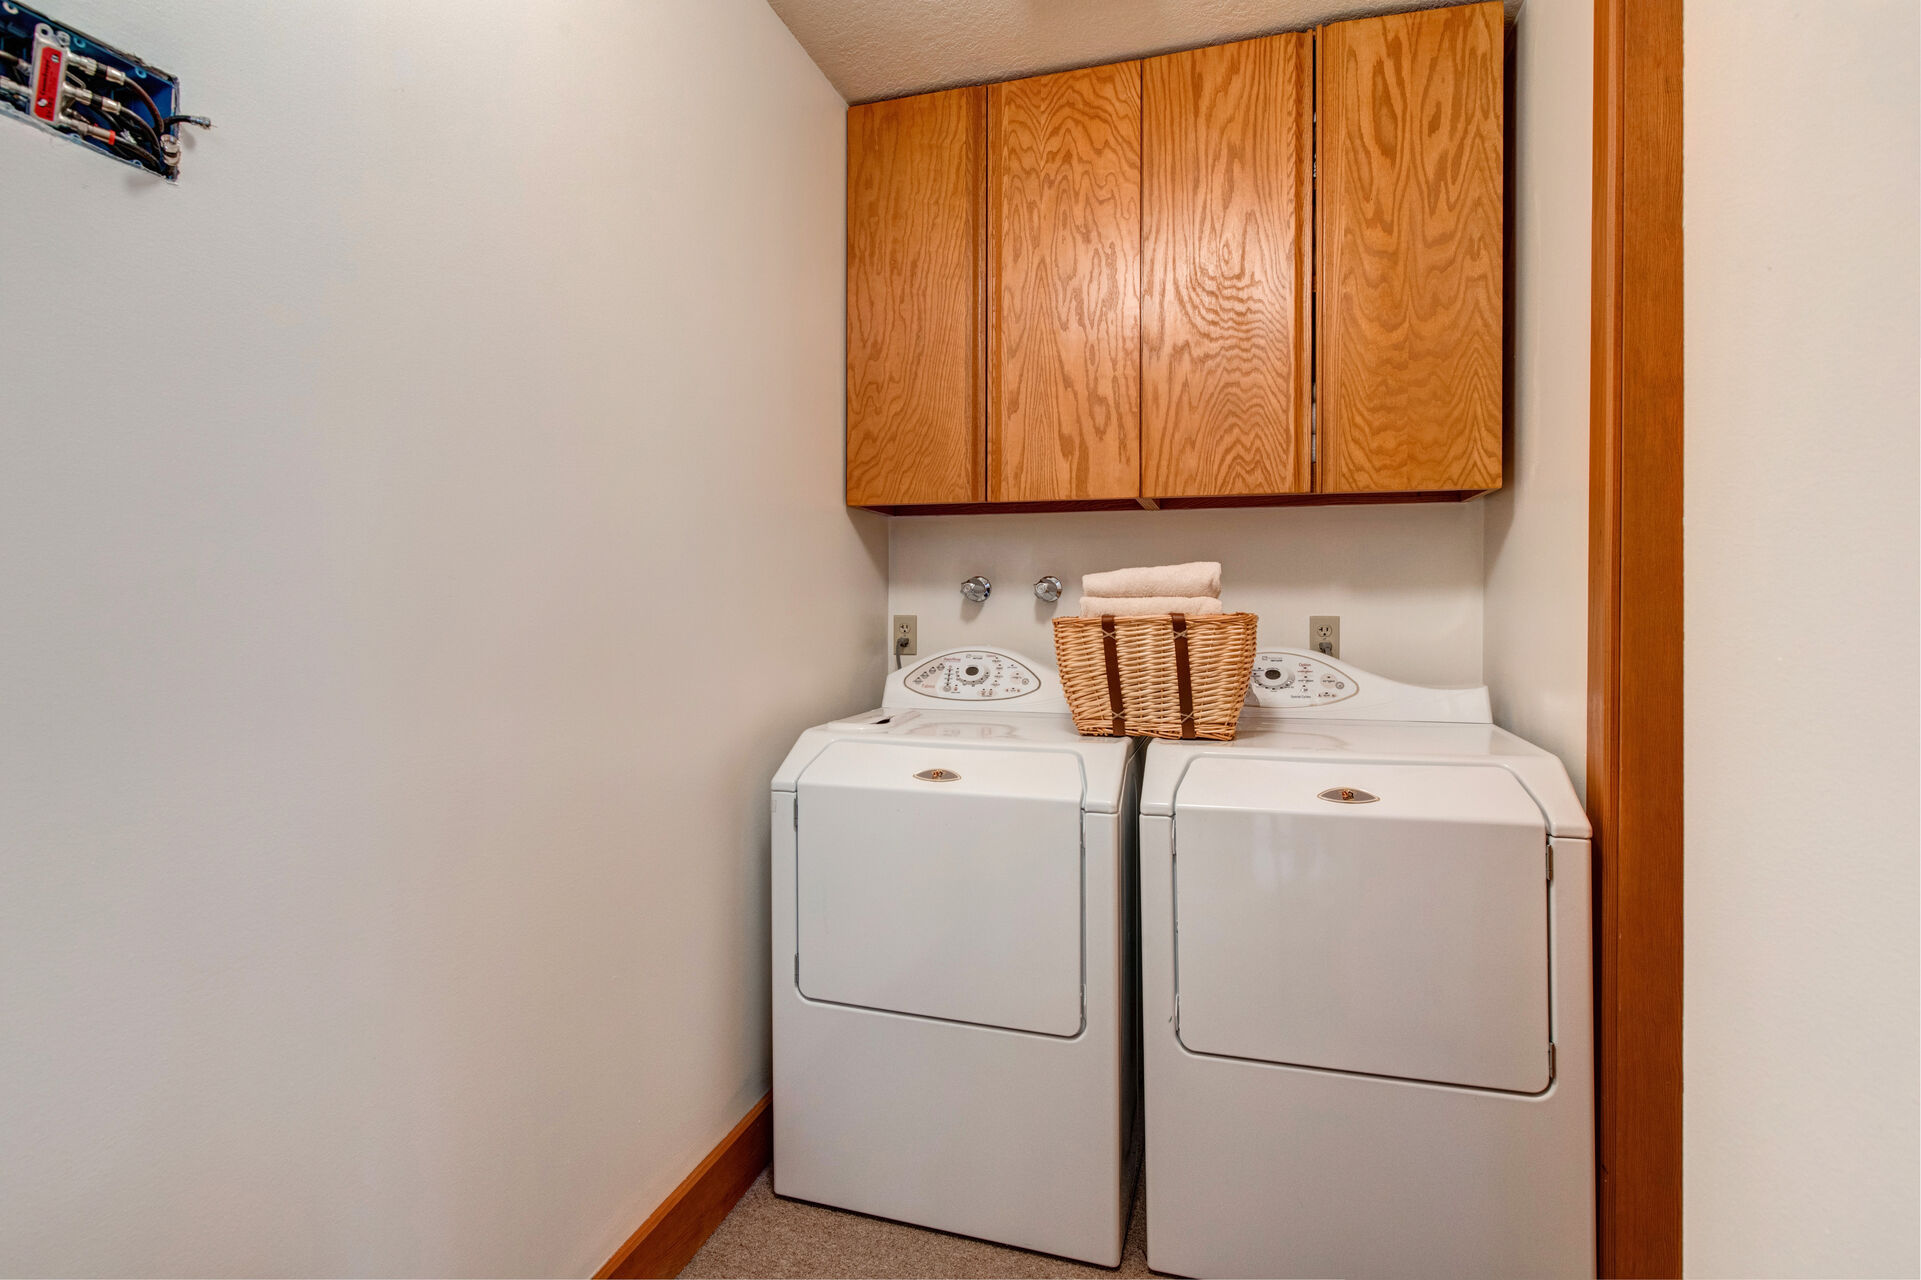 Laundry Room off of Kitchen